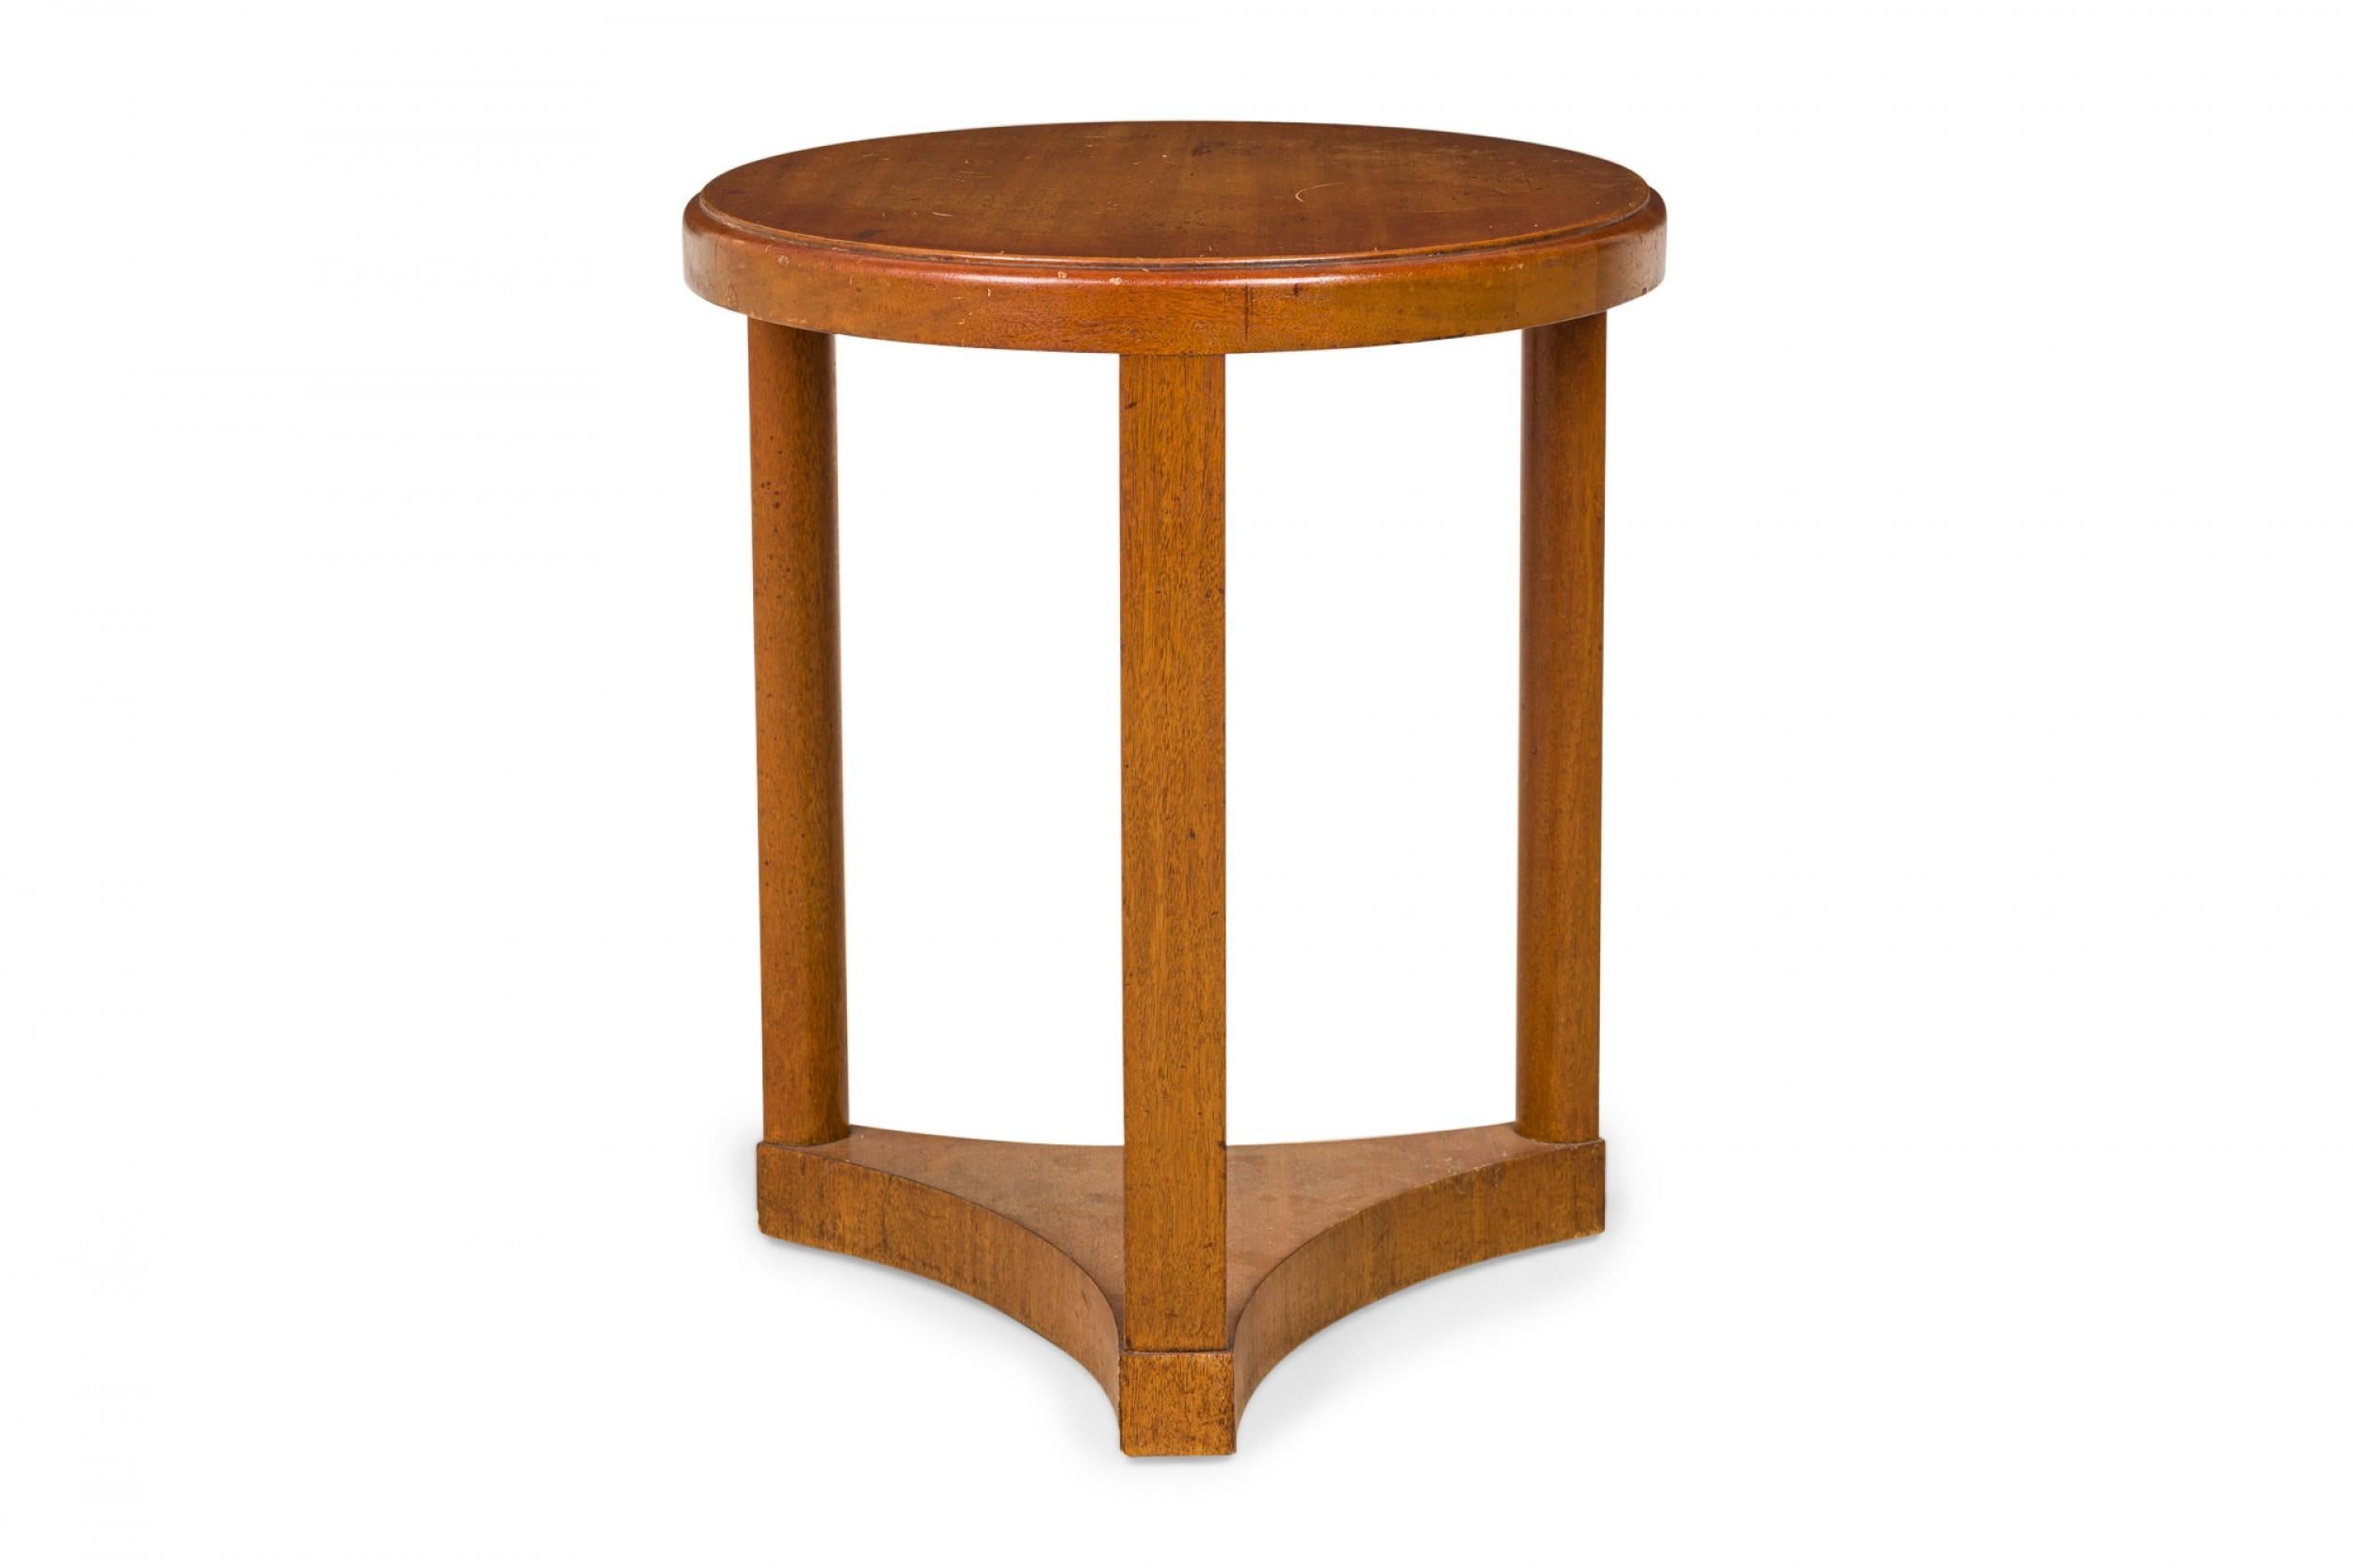 20th Century Edward Wormley American Mid-Century Tall Round Wooden End / Side Table